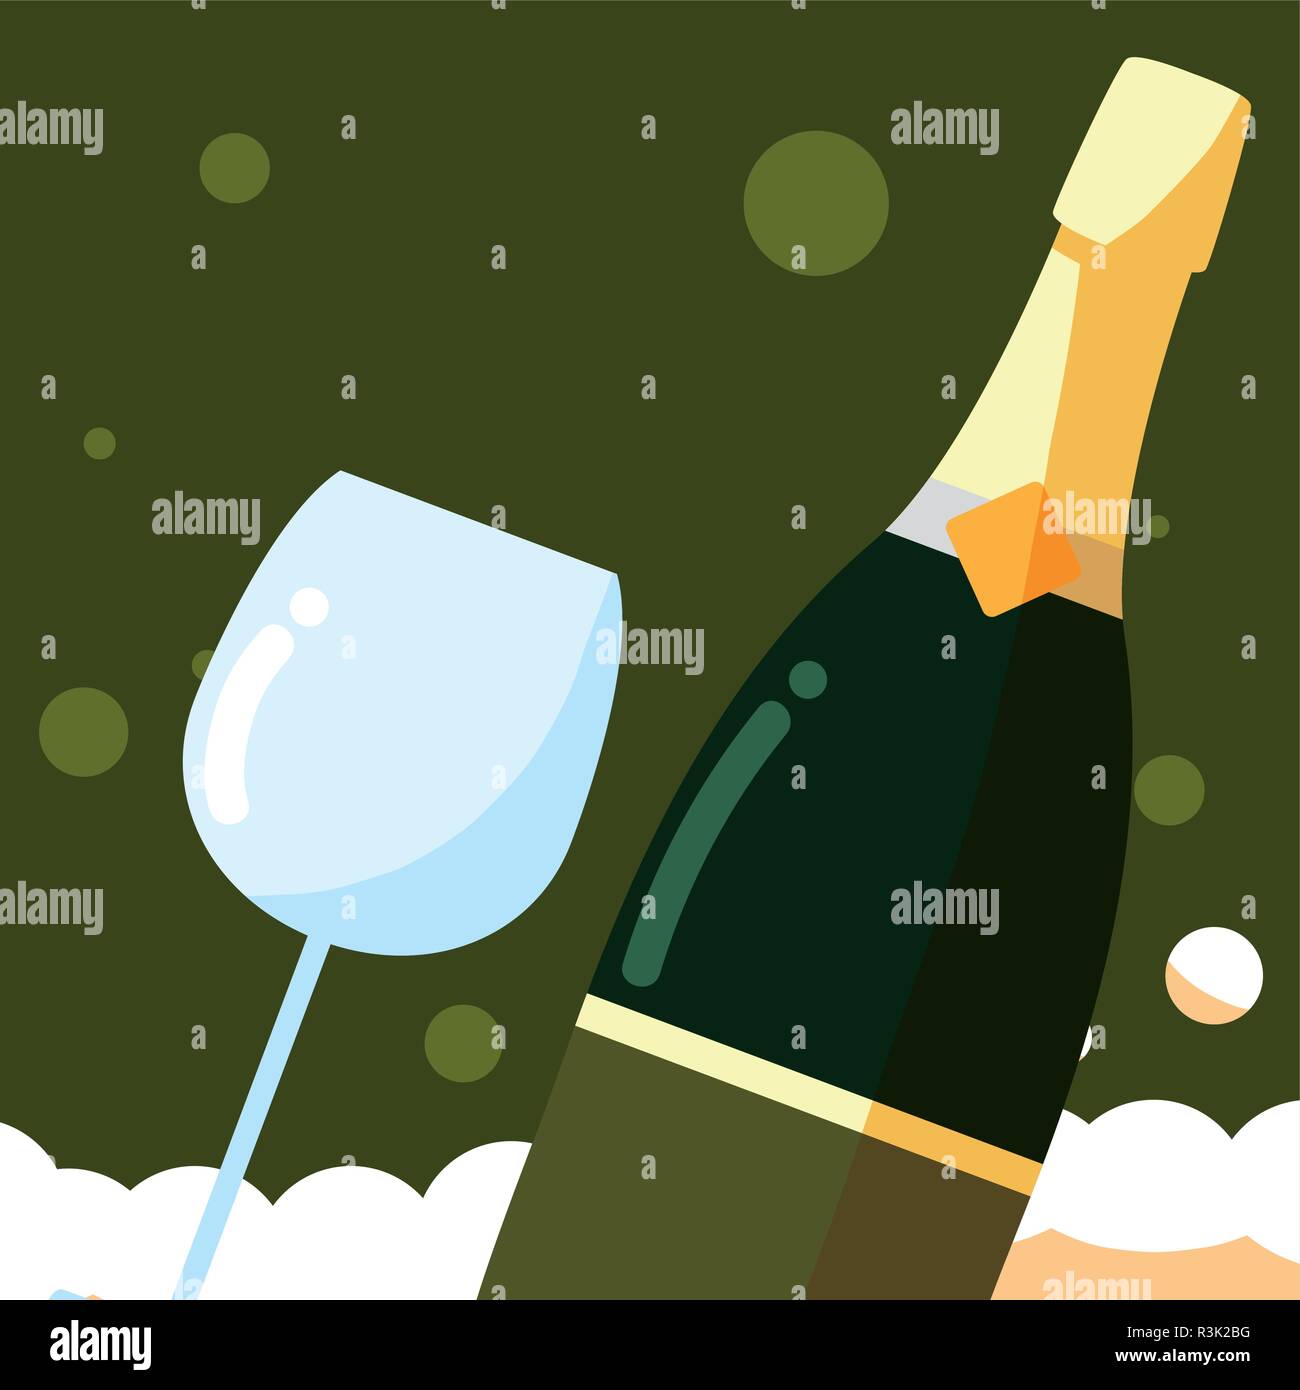 Champagne bottle and glass icon over green background, vector illustration Stock Vector